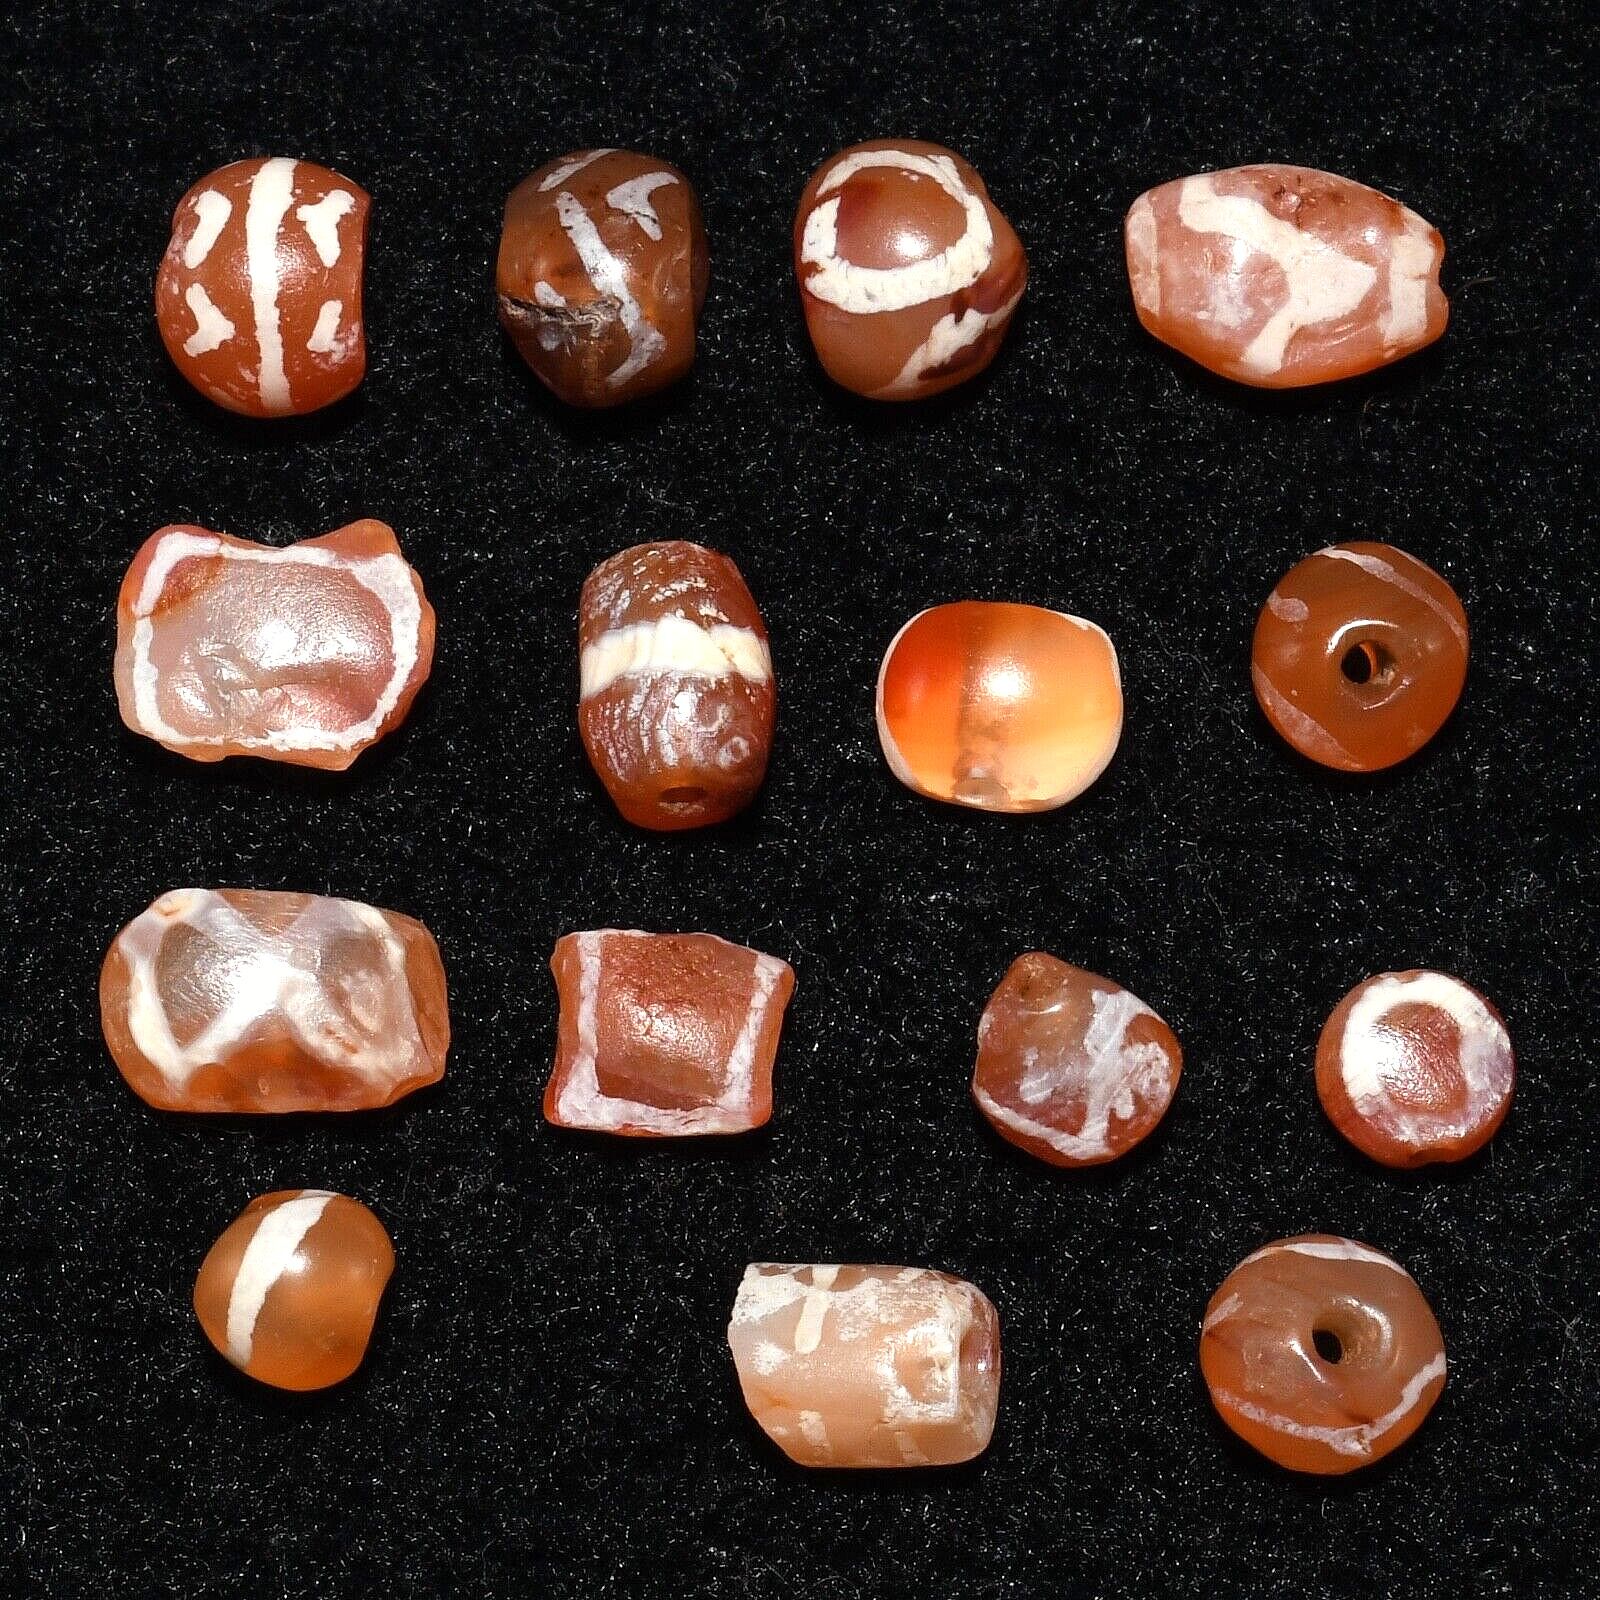 15 Ancient Near Eastern & Central Asian Etched Carnelian Beads in Good Condition